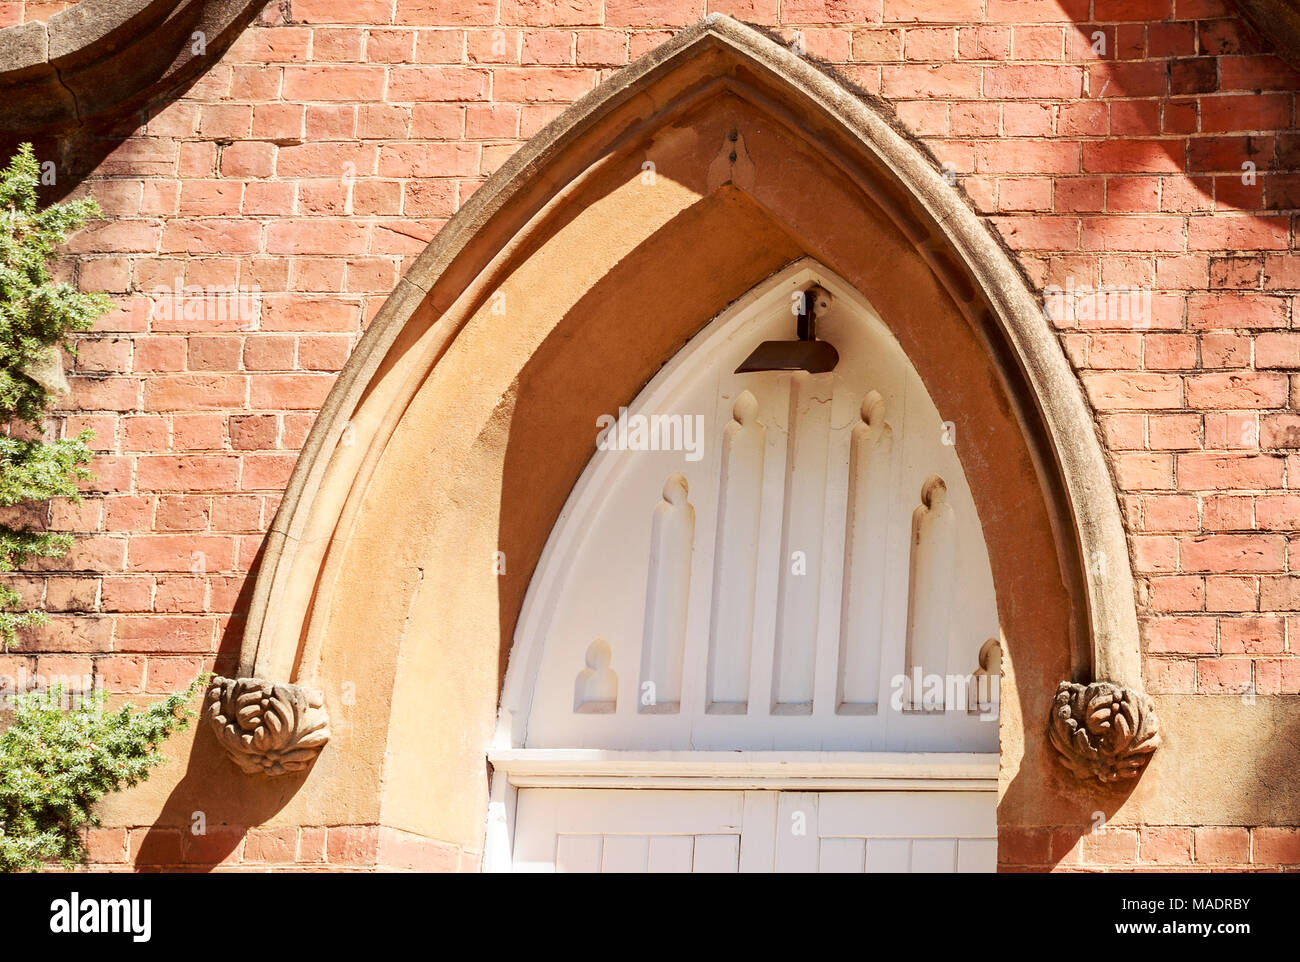 Detail of the arch above the door of St John Uniting Church in Narrandera, New South Wales, Australia Stock Photo